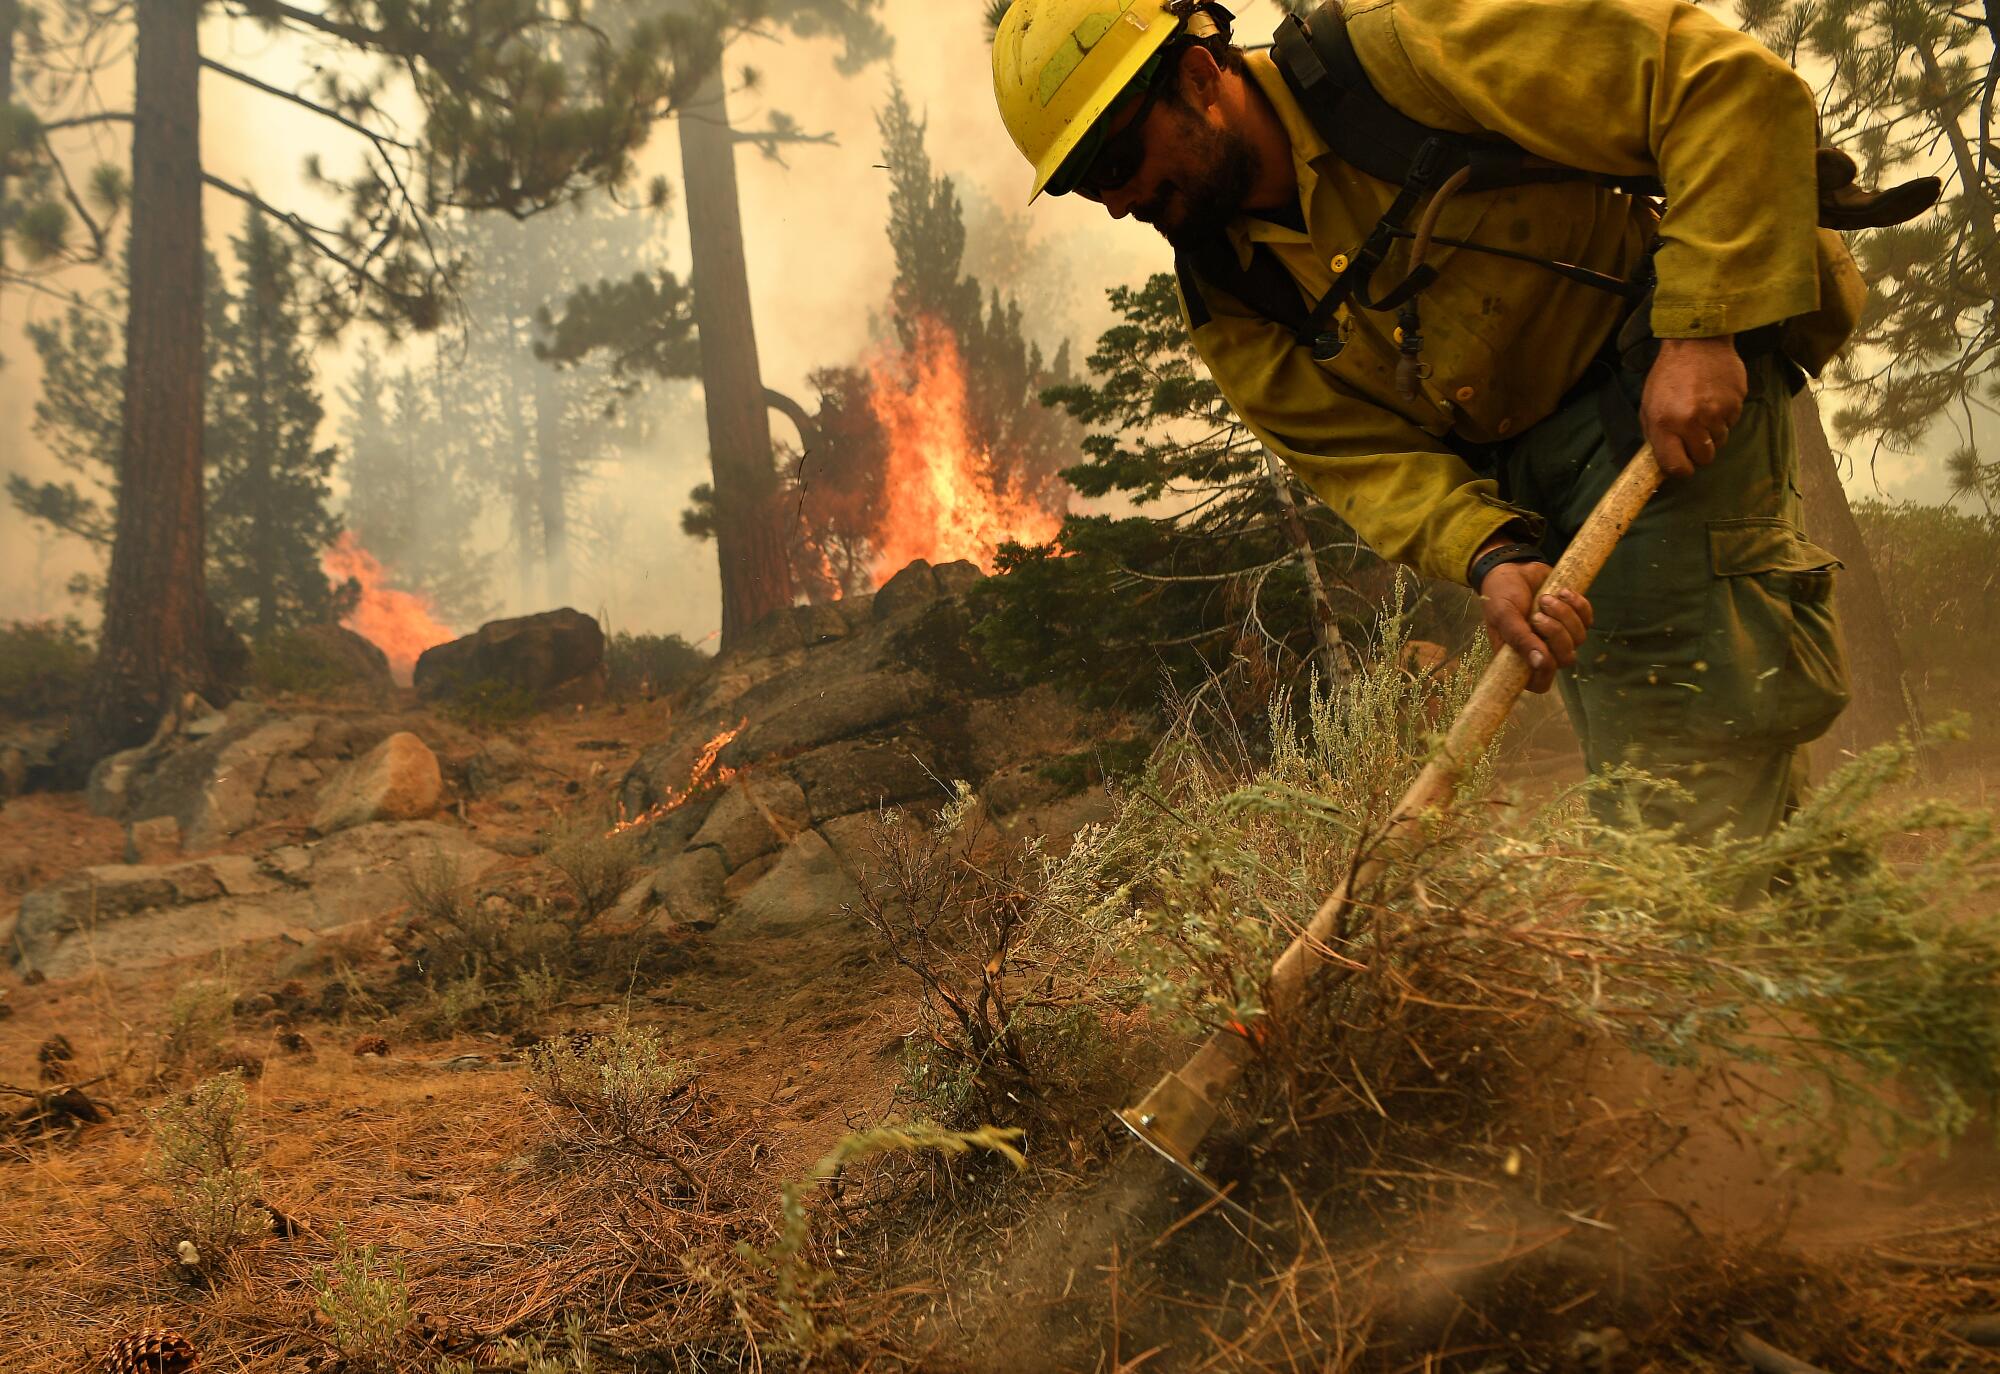 A firefighter uses a hand tool to dig into the dirt as flames burn nearby